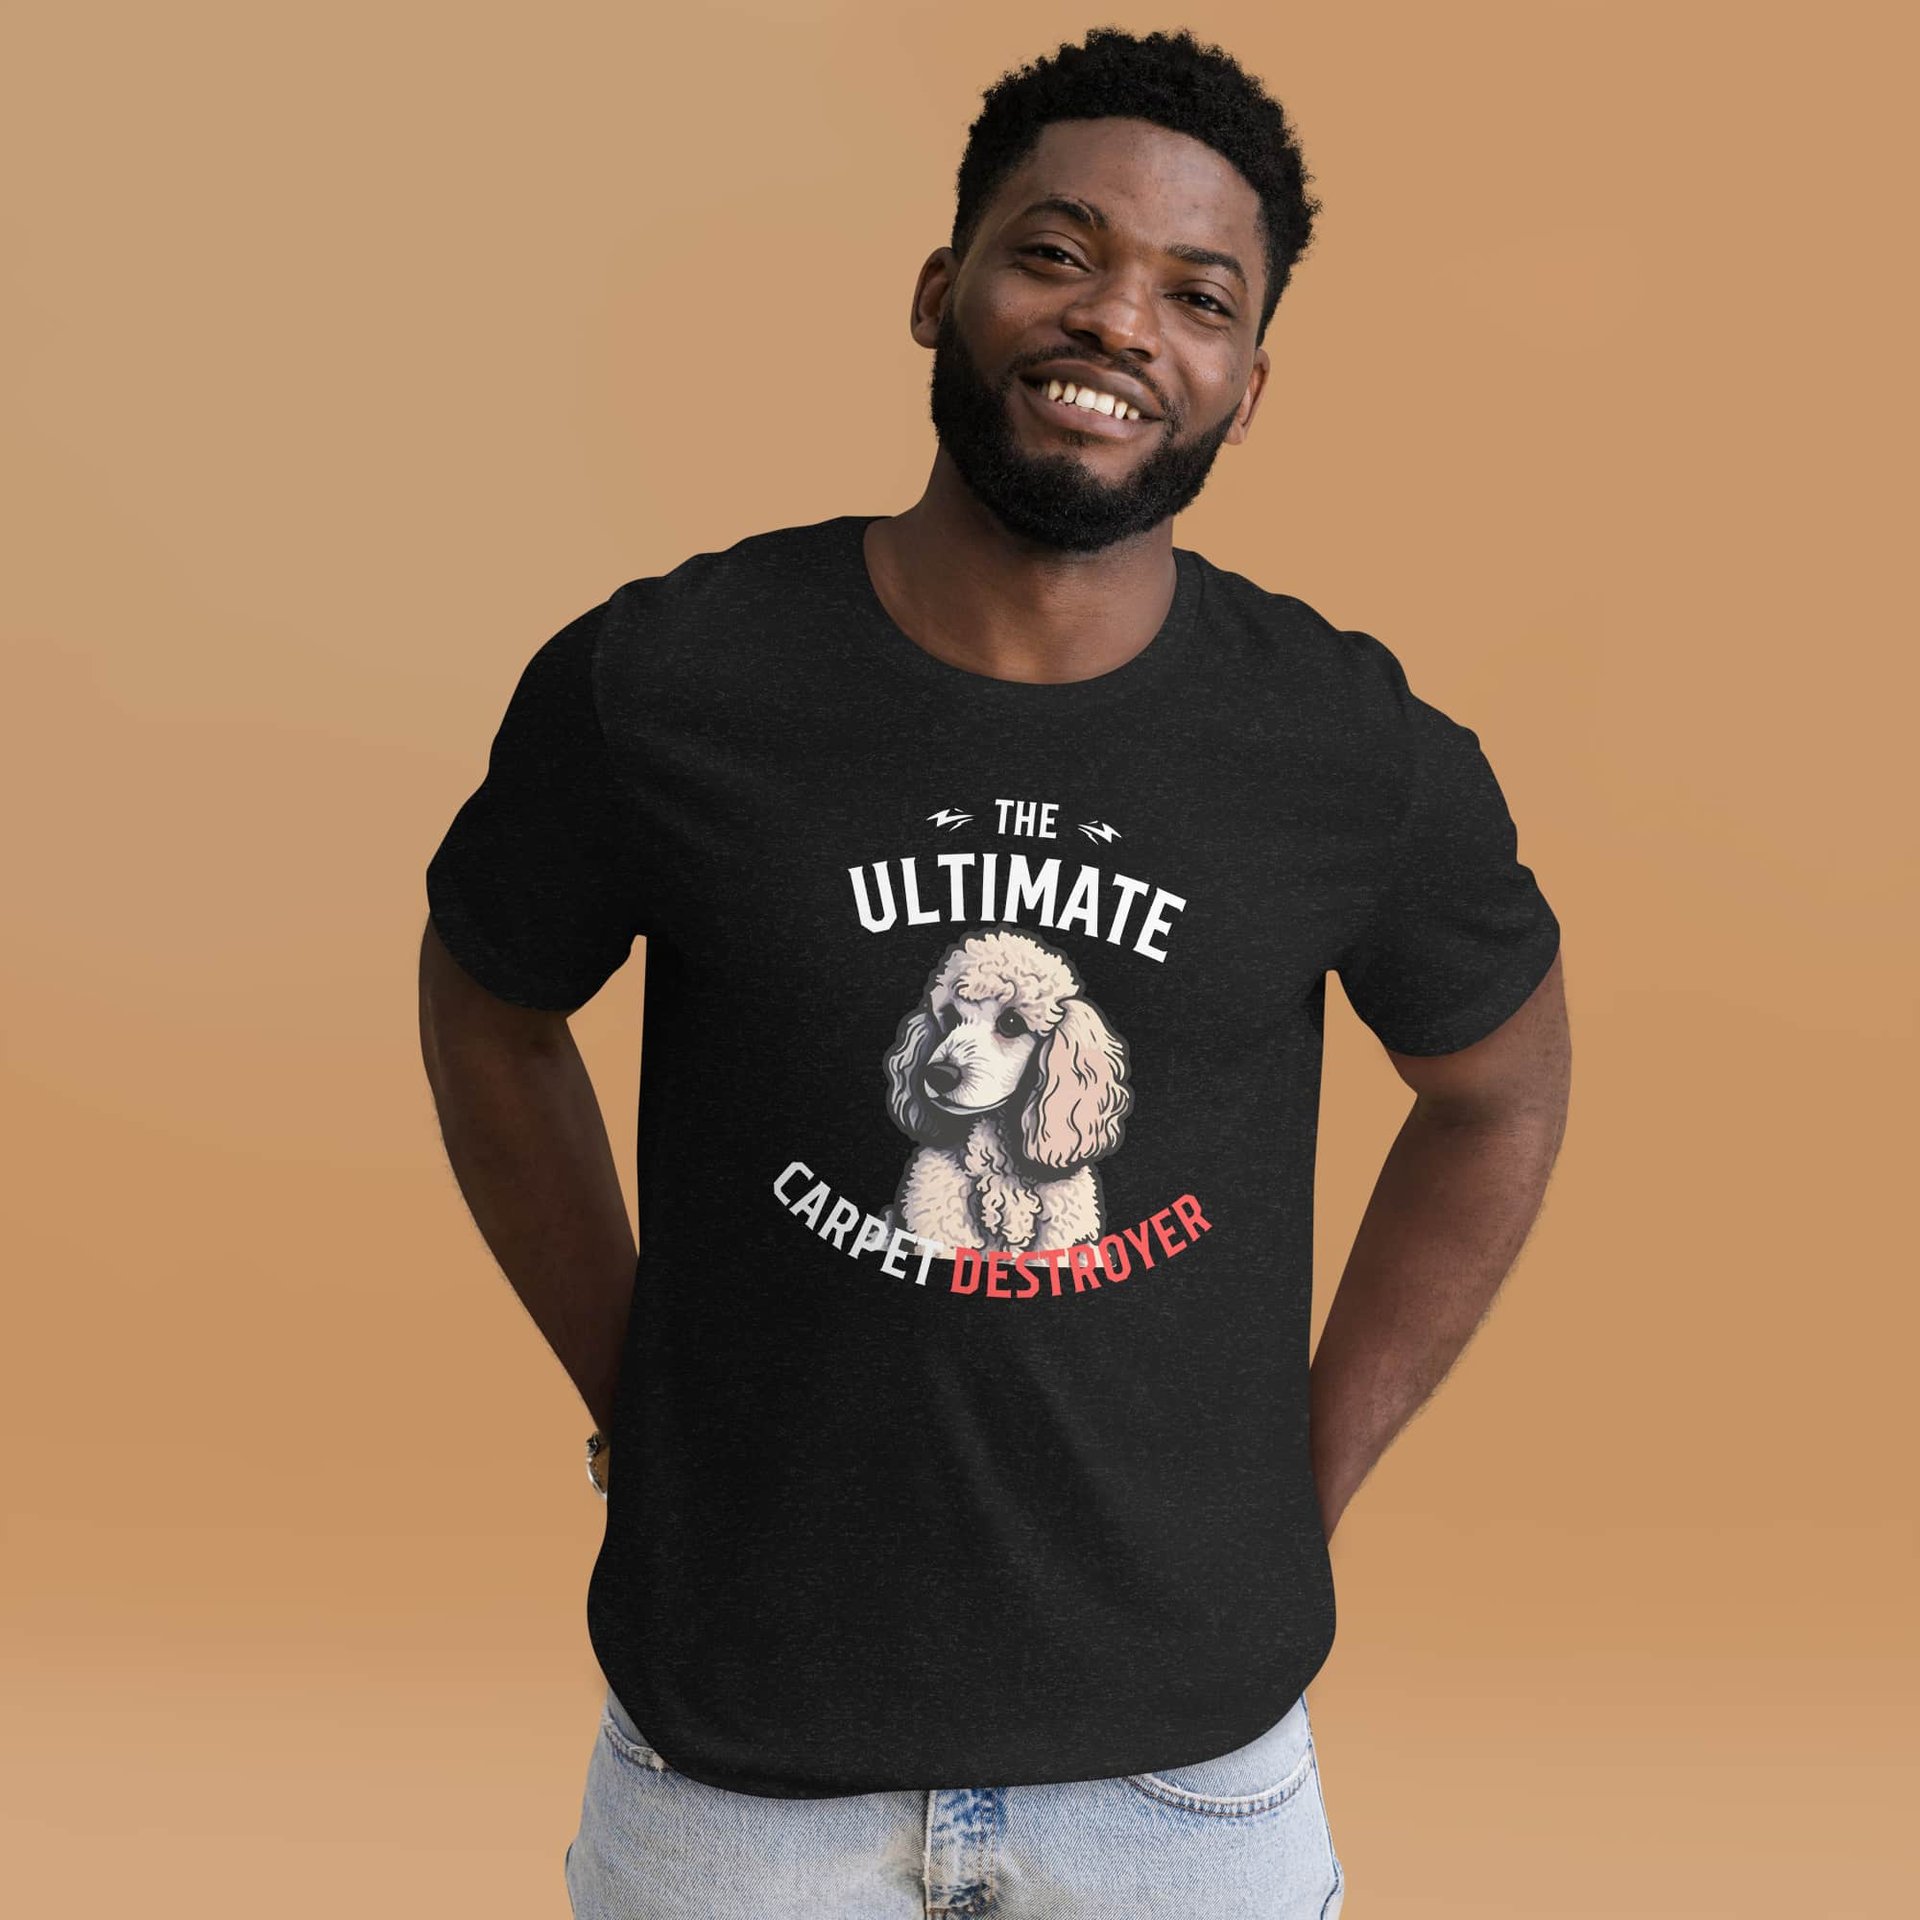 The Ultimate Carpet Destroyer Funny Poodle Unisex T-Shirt male t